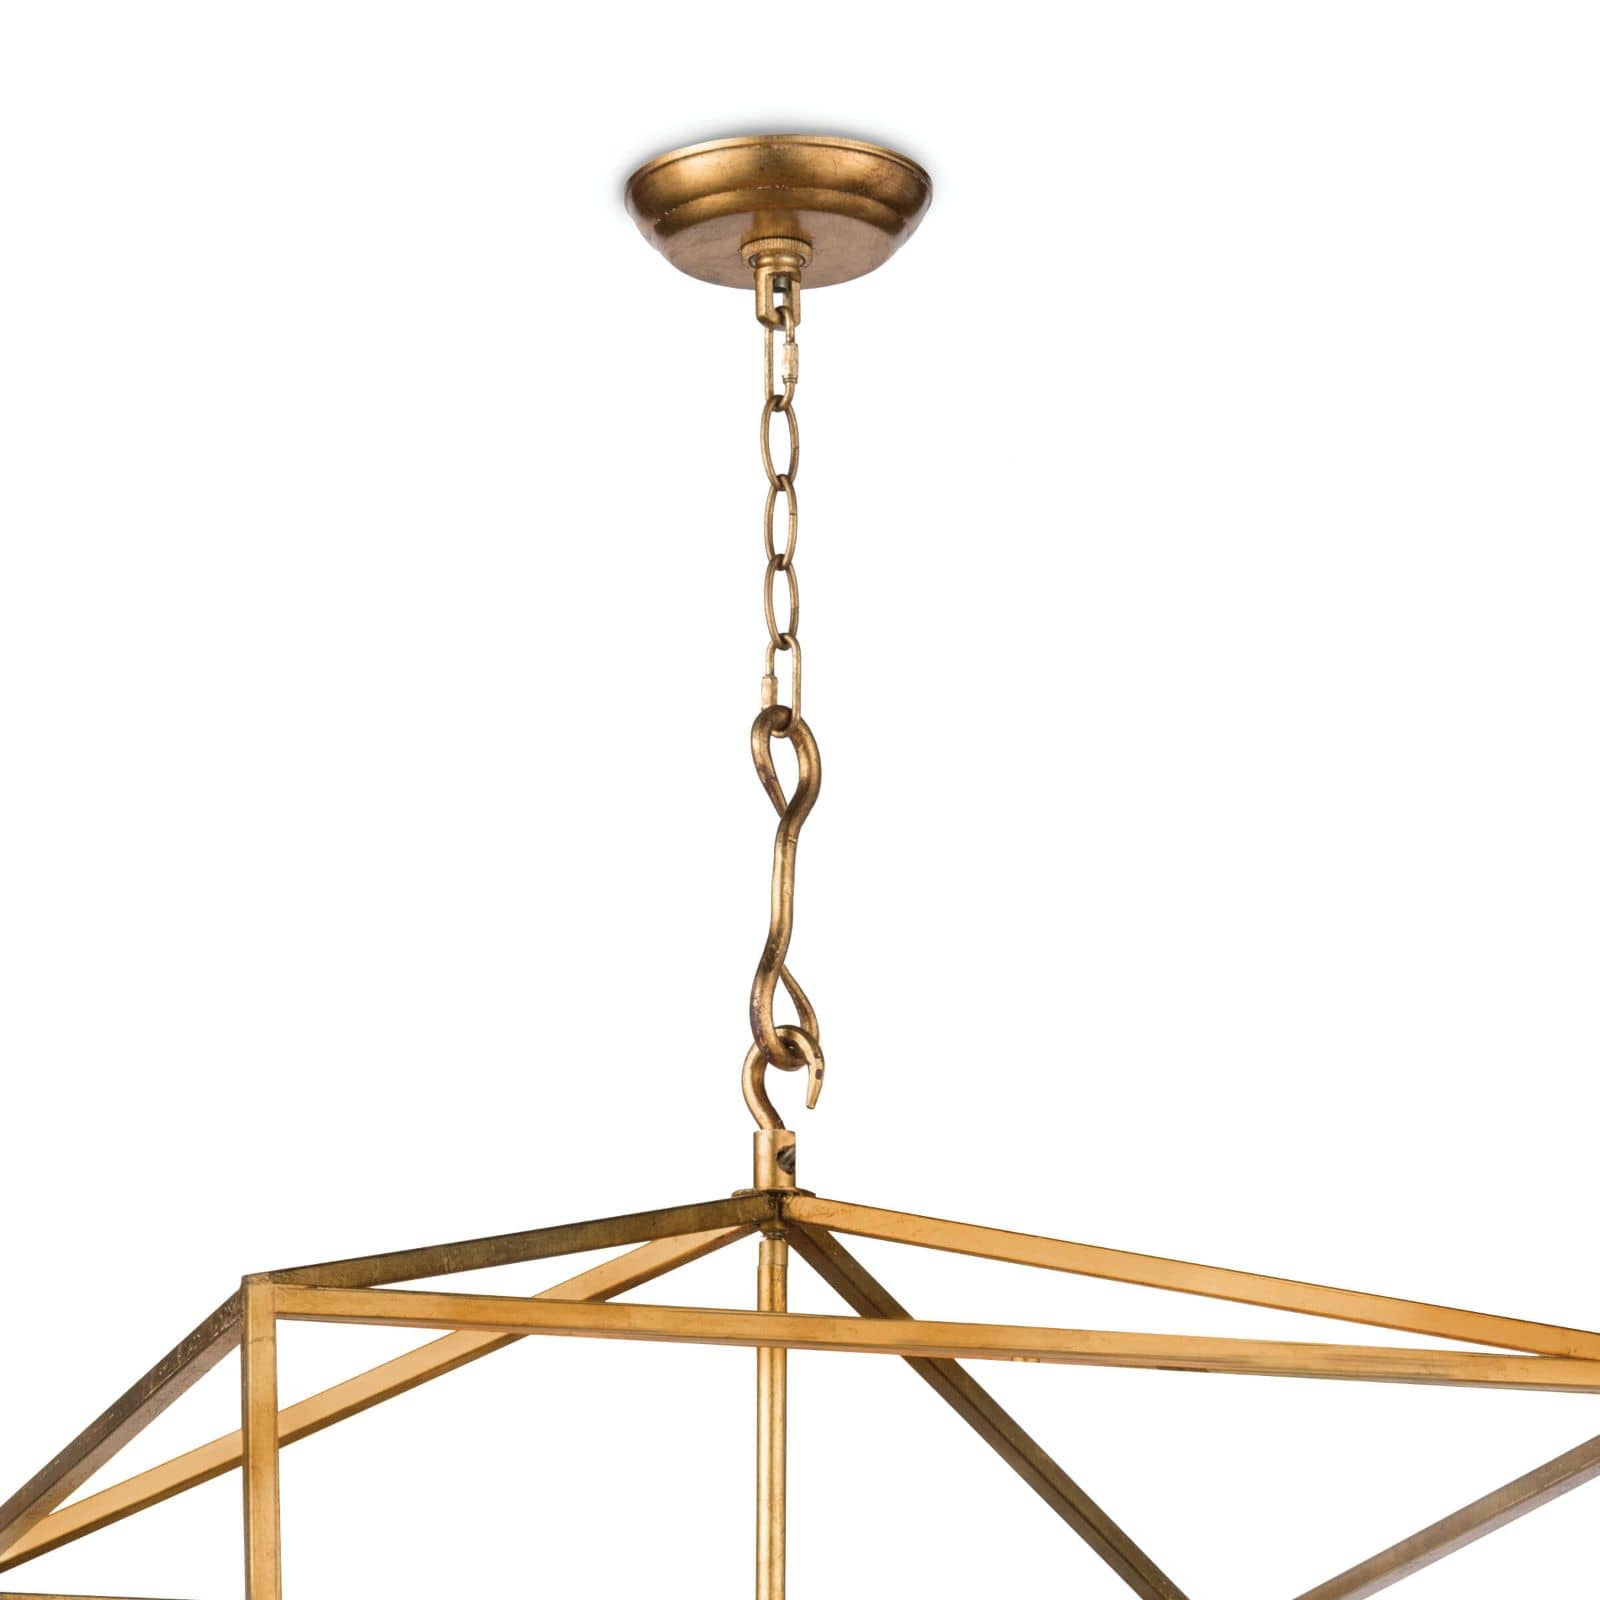 Cape Lantern in Antique Gold Leaf by Southern Living